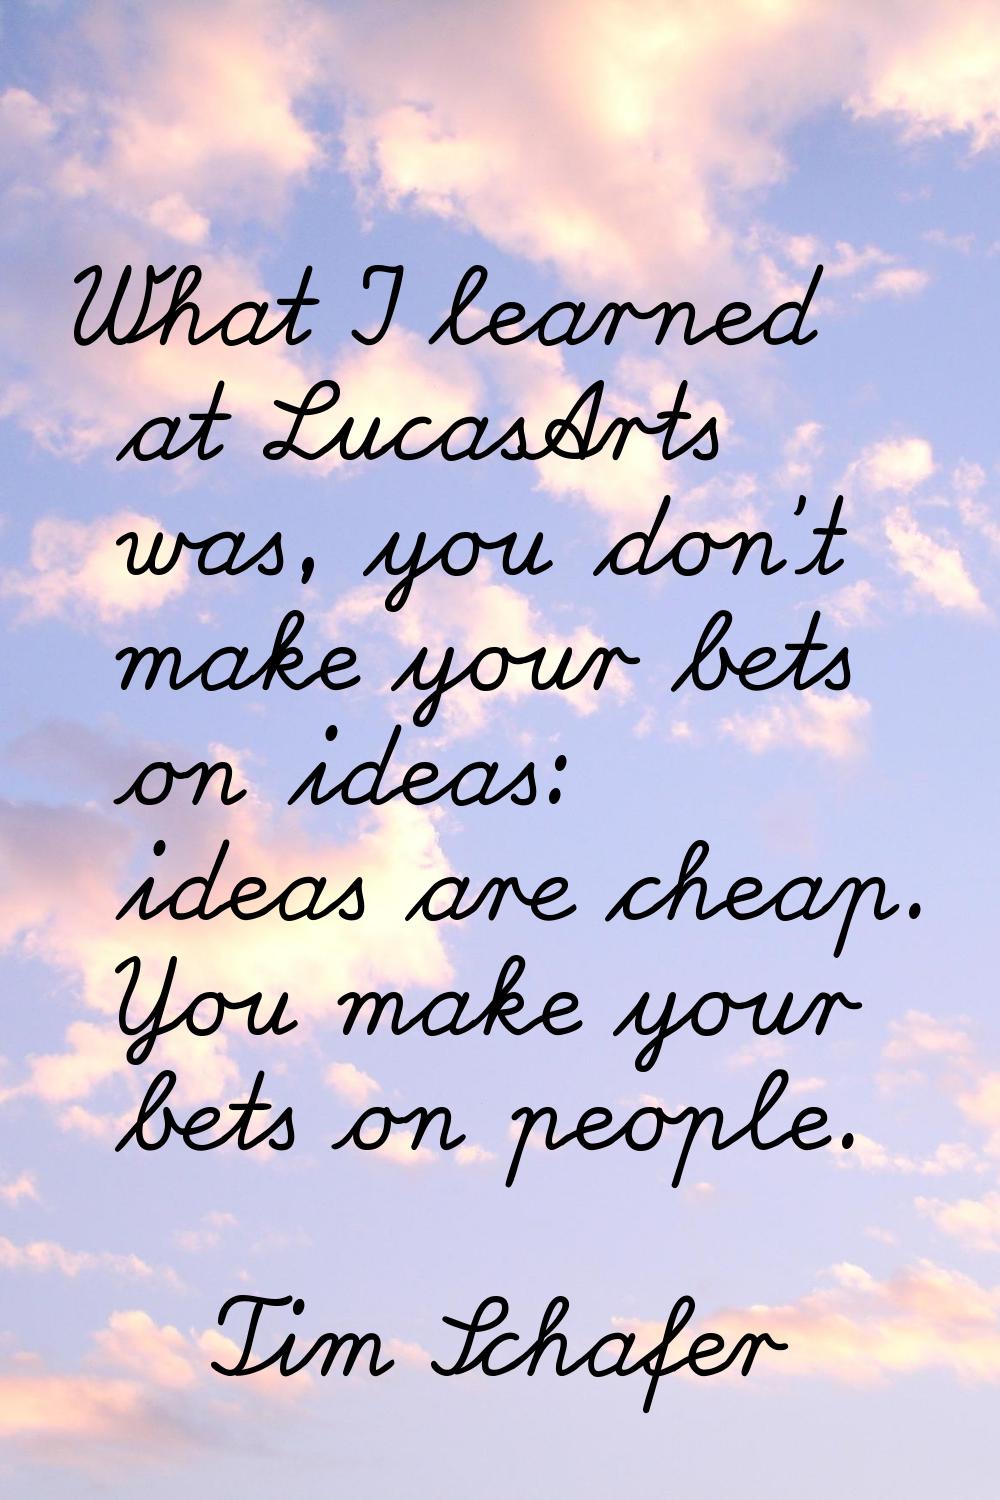 What I learned at LucasArts was, you don't make your bets on ideas: ideas are cheap. You make your 